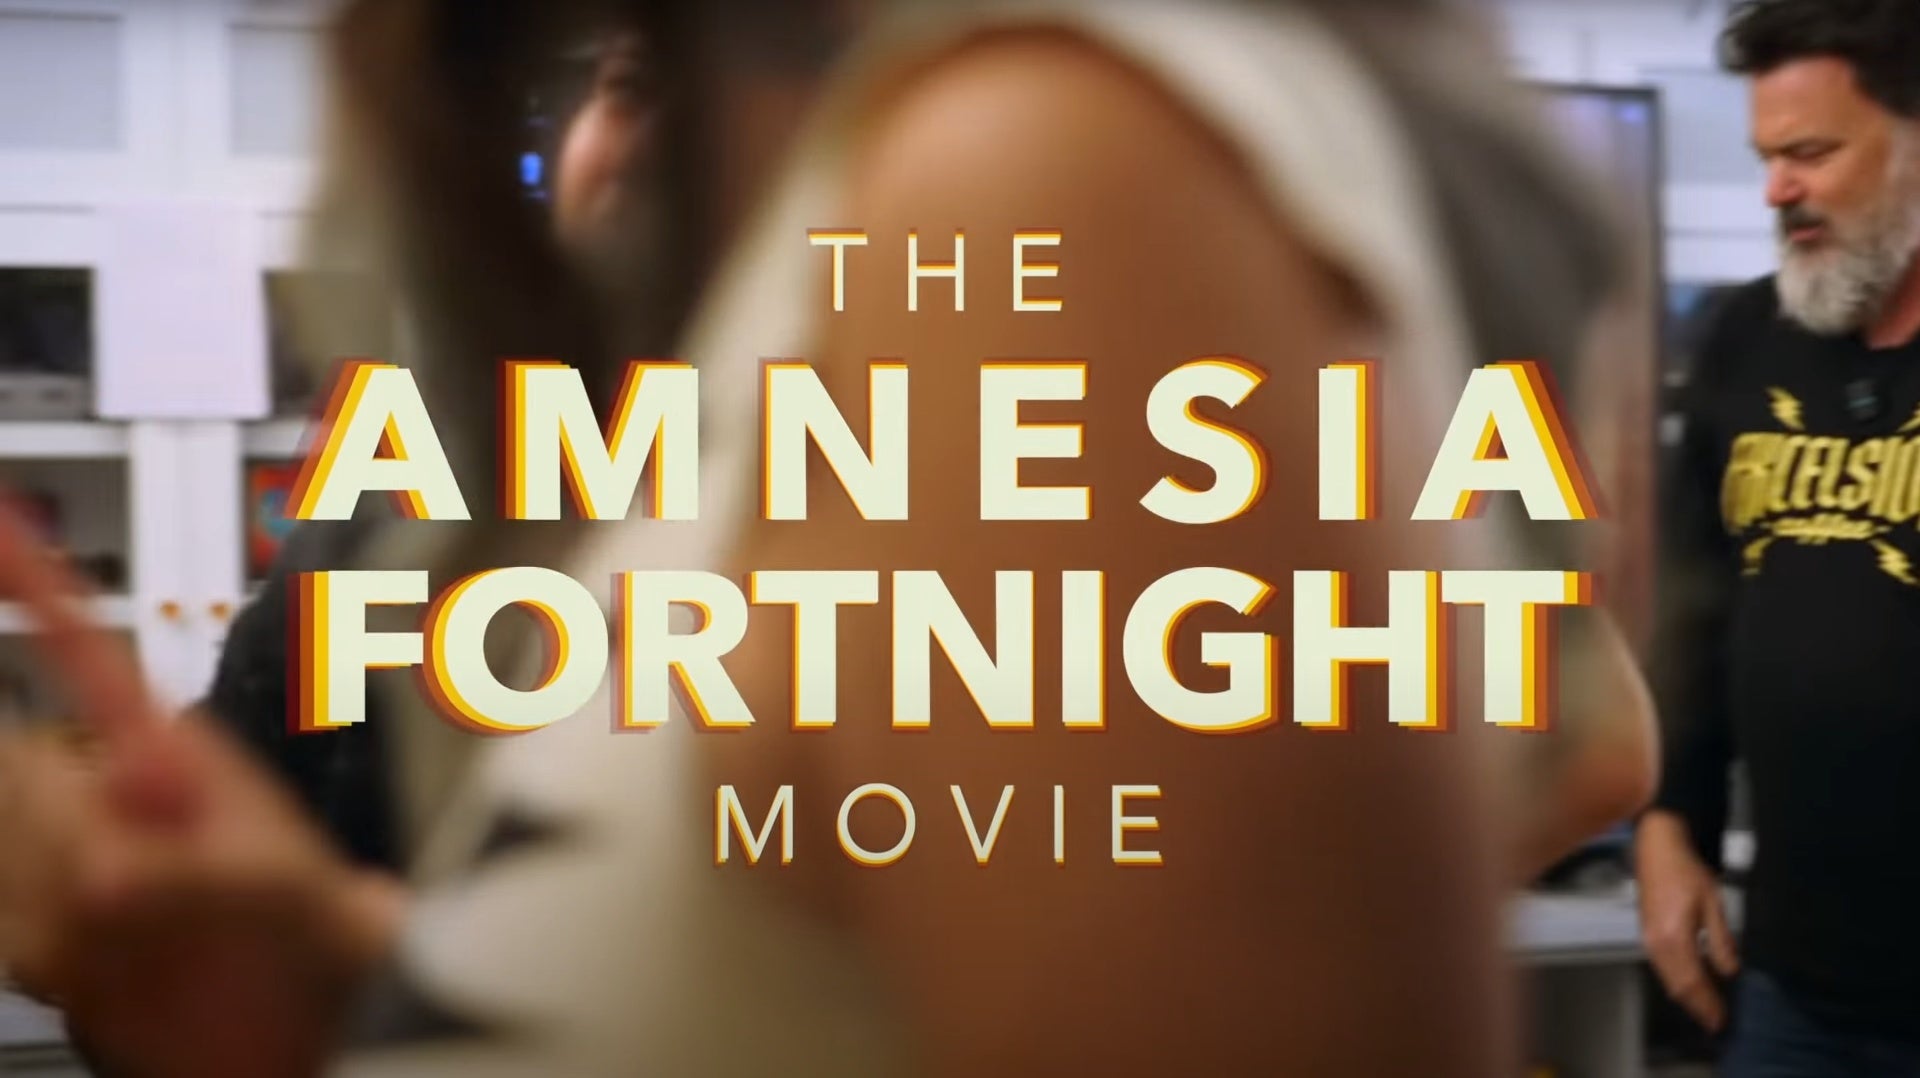 A still from the Amnesia Fortnight Movie, showing the name of the film on screen. A sneaky Tim Schafer is entering the frame from the right.